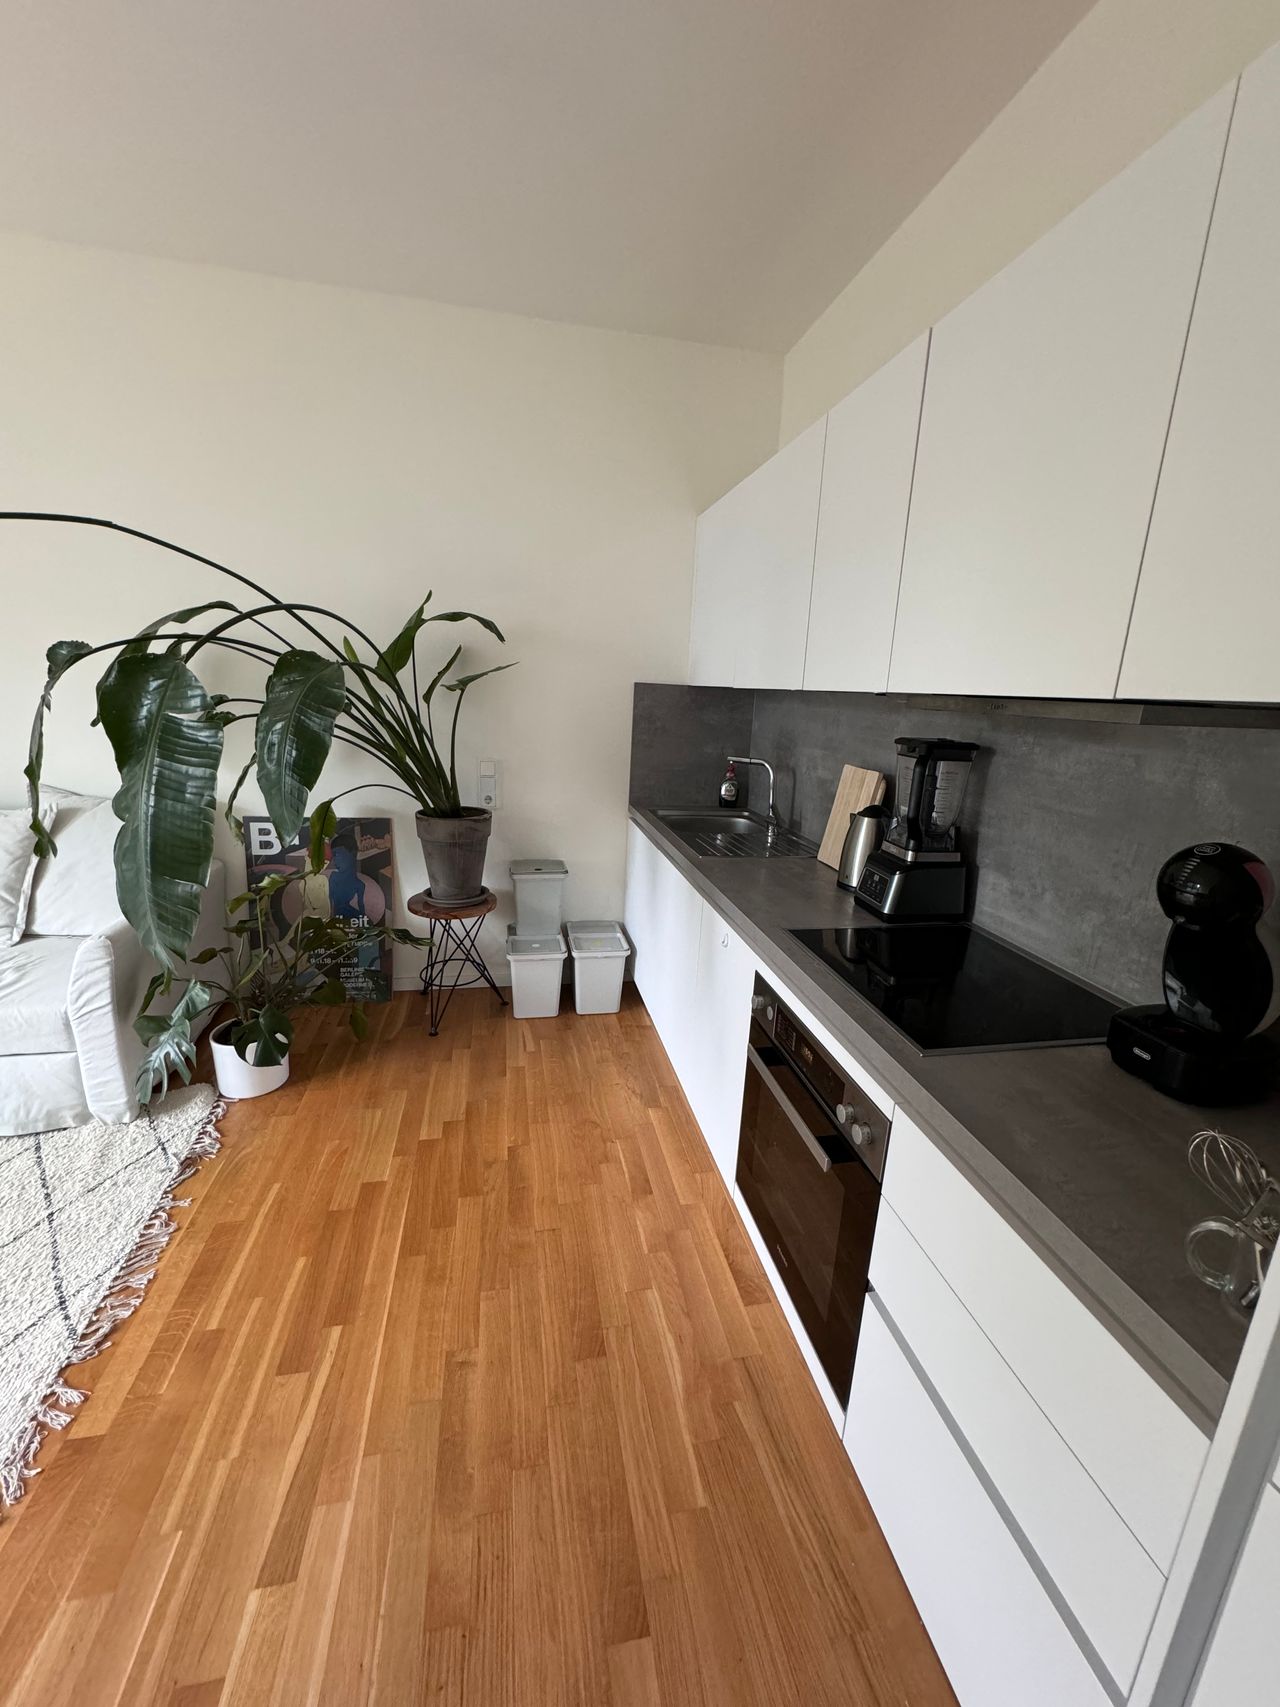 A Fully Furnished Flat at the Crossroads of Kreuzberg and Mitte! Available from July 5th